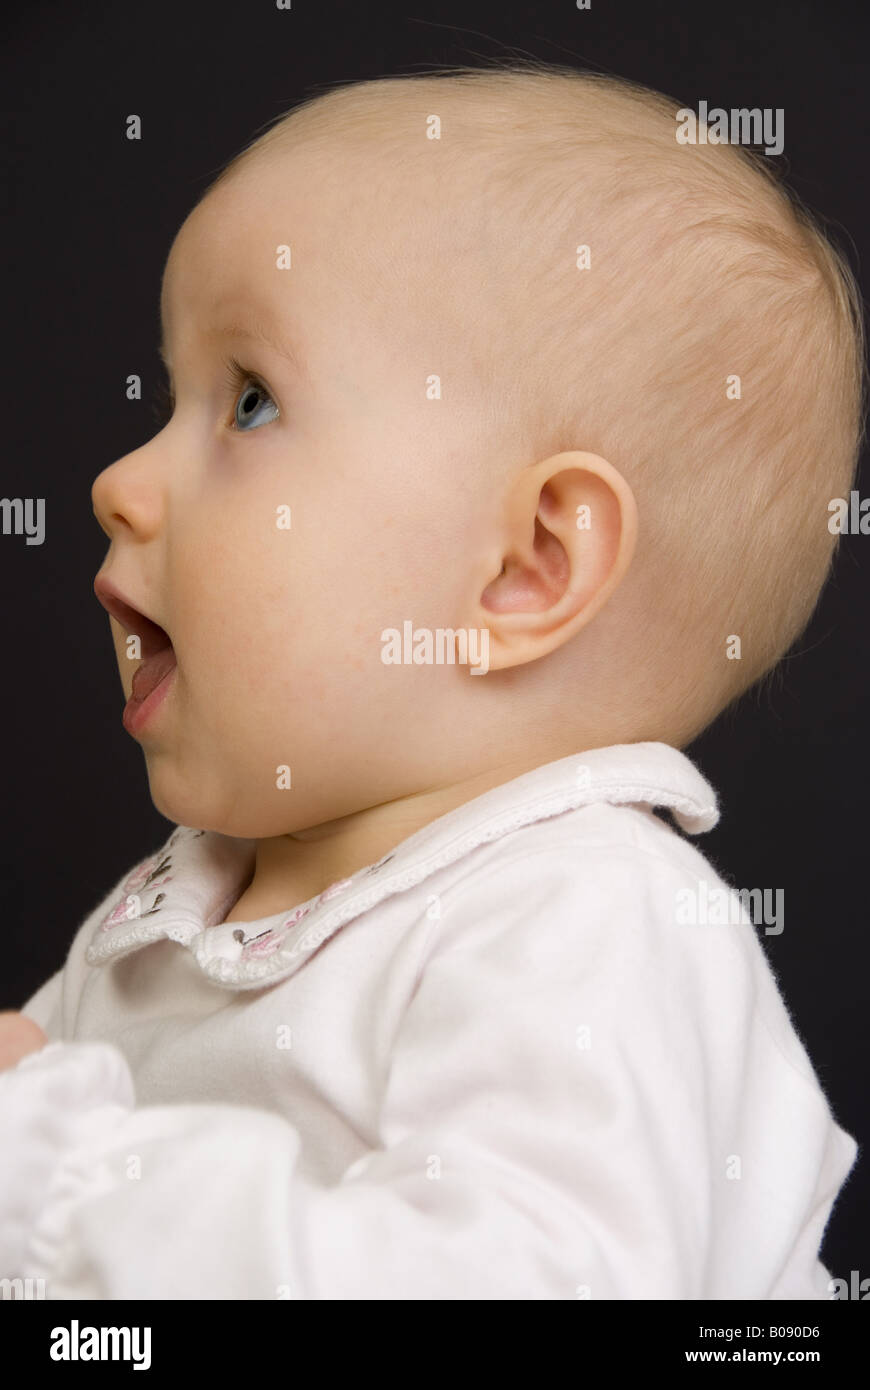 Portrait Of A Baby Side View Stock Photo Alamy